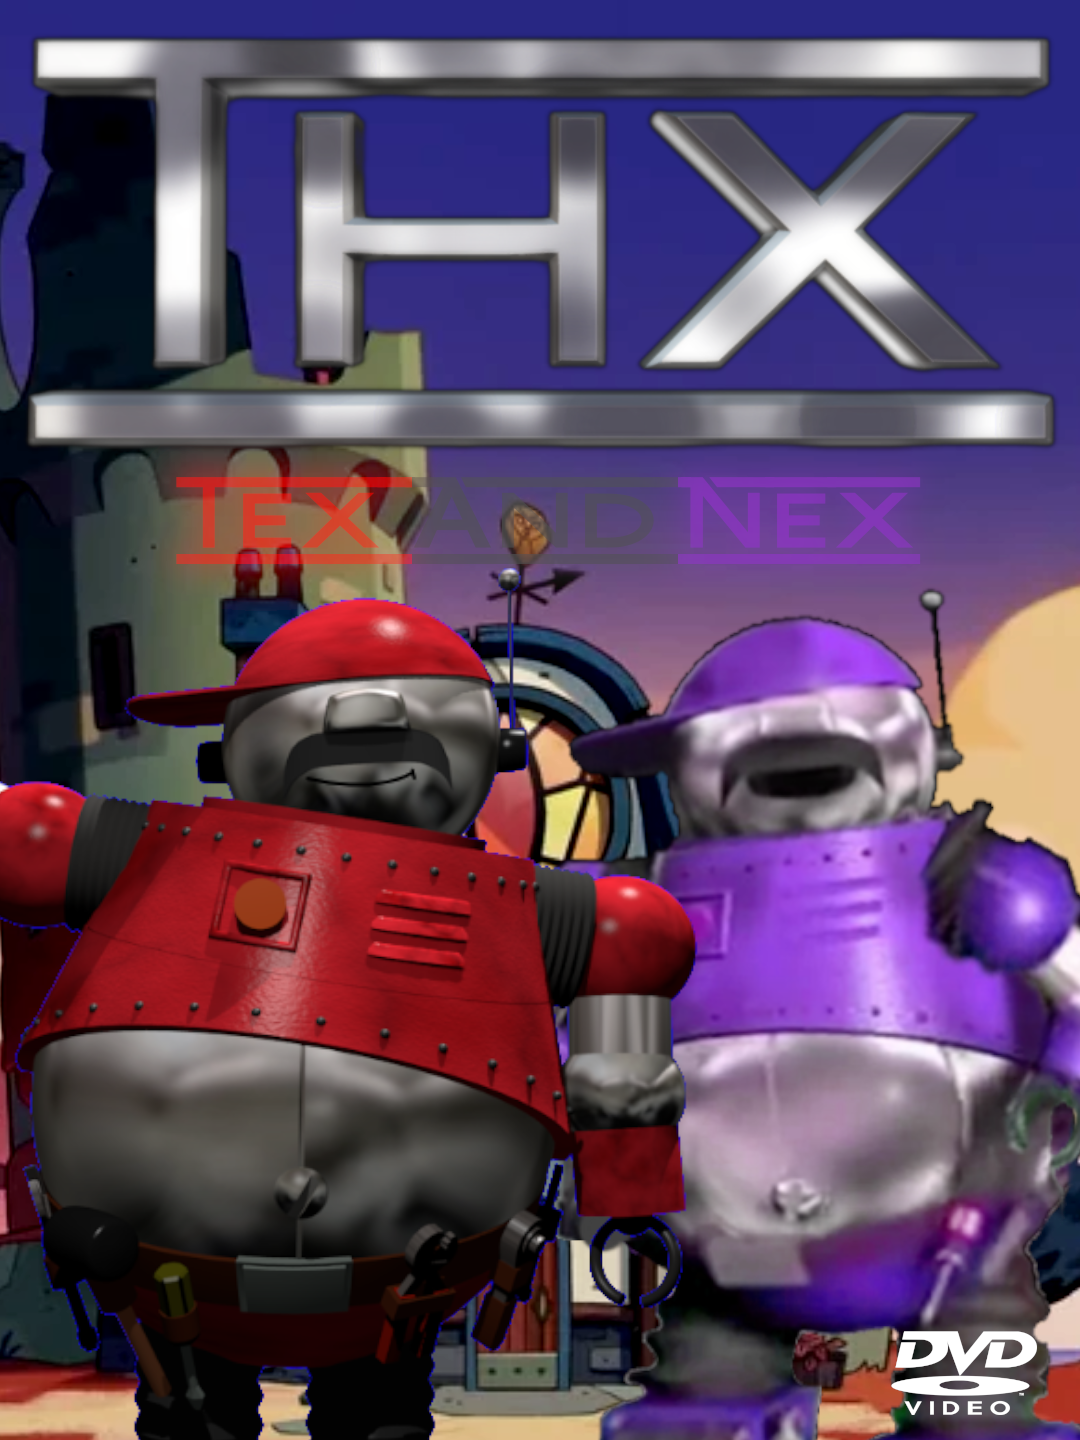 Tex And Nex DVD Cover by samsather2 on DeviantArt